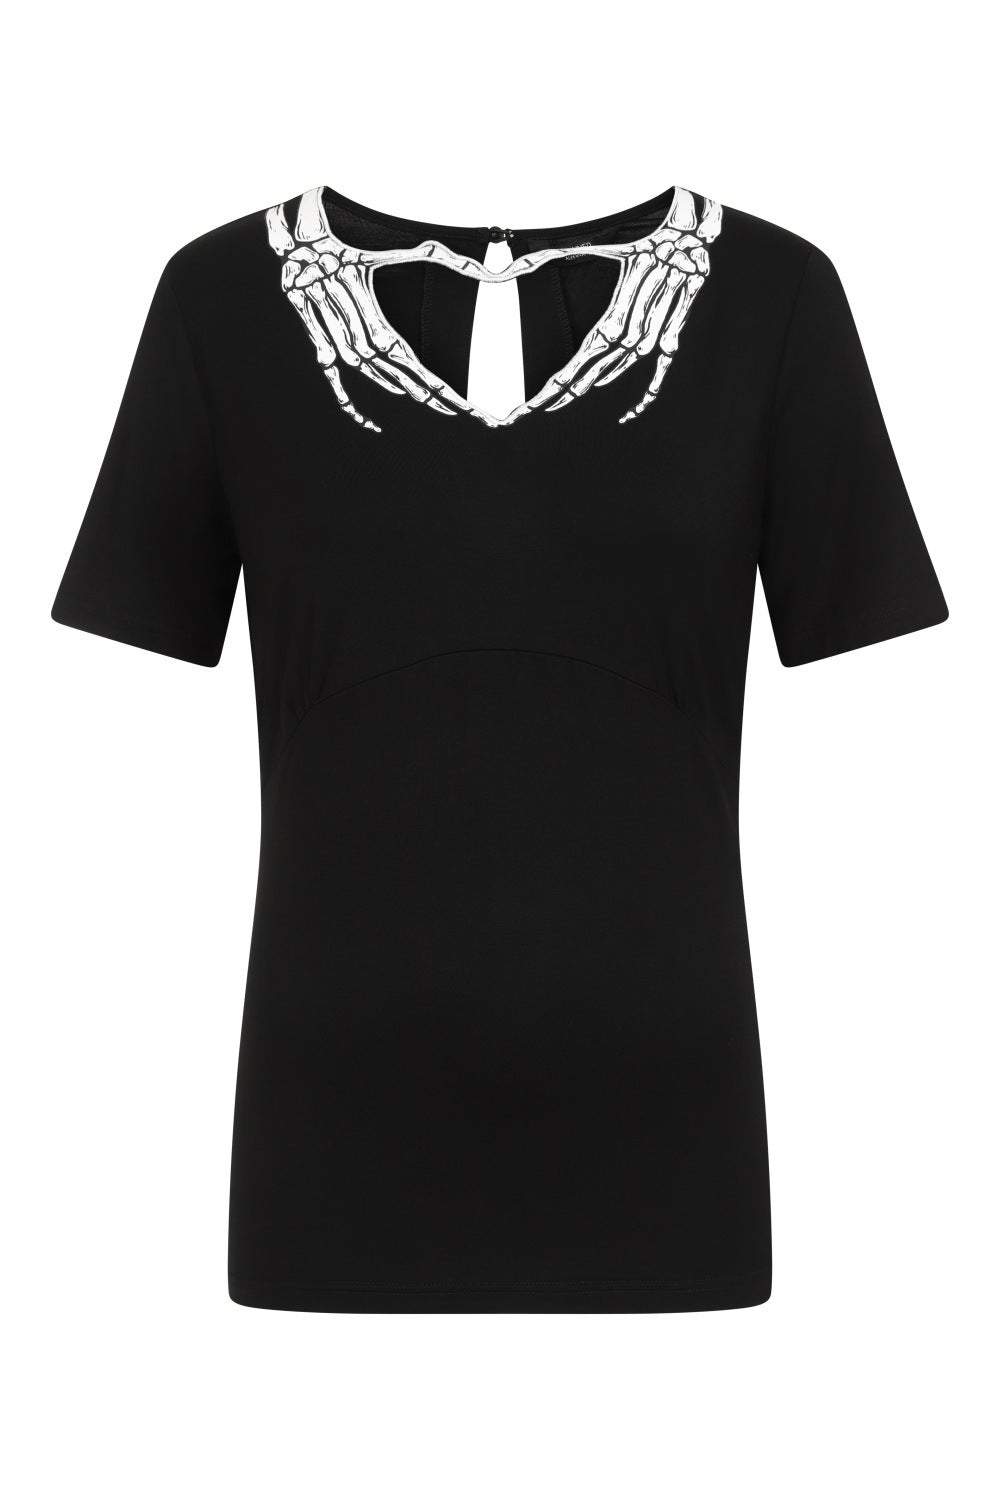 Short sleeve black top with skeleton hands around the collar creating a heart shape. 